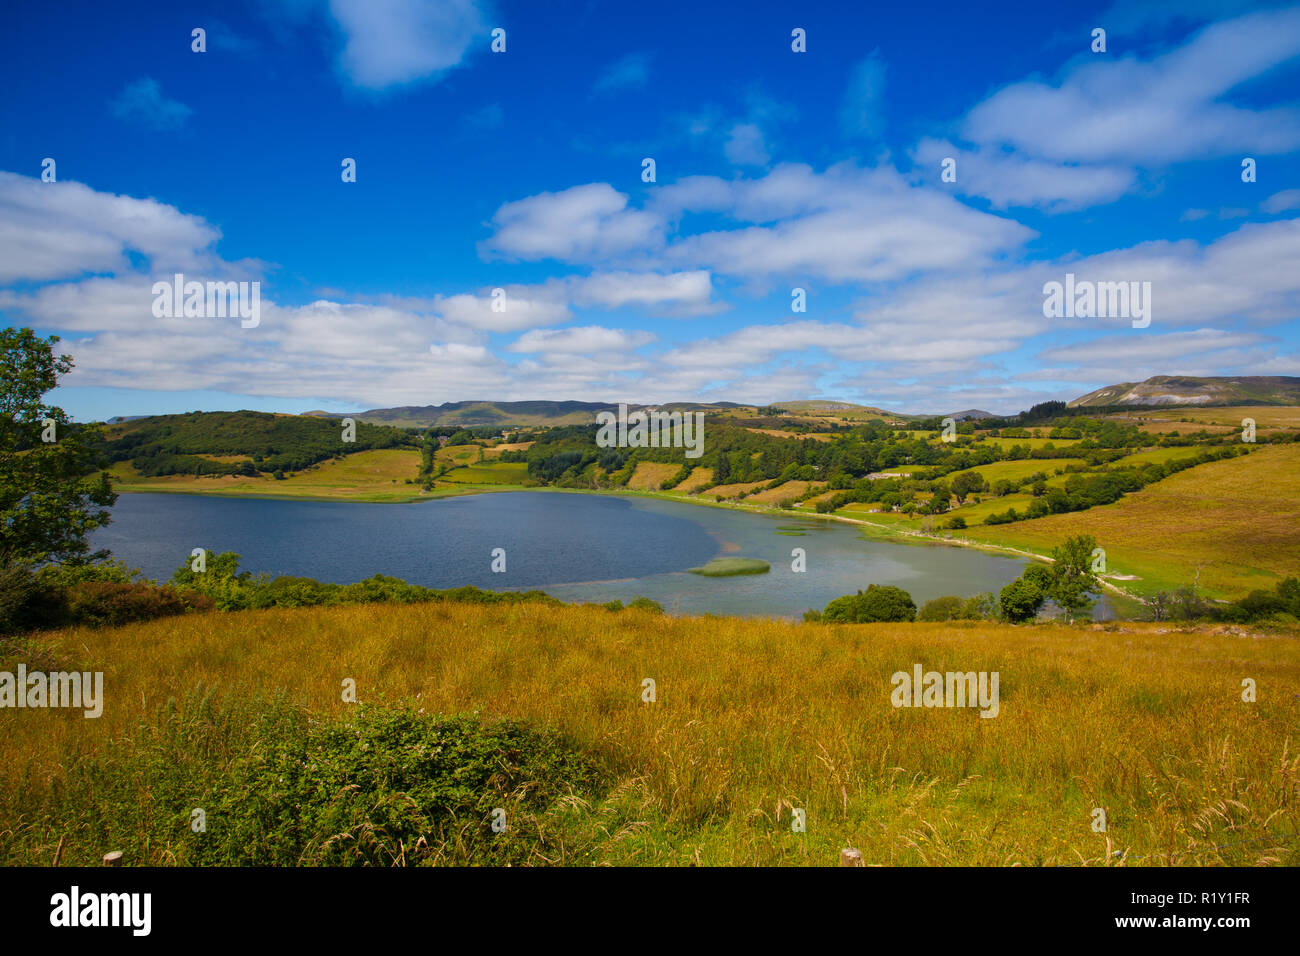 The farmers fields from Colgagh Lough Viewpoint. Ireland. Colgagh Lough is a lake and is nearby to Ballure and Colgagh. Stock Photo